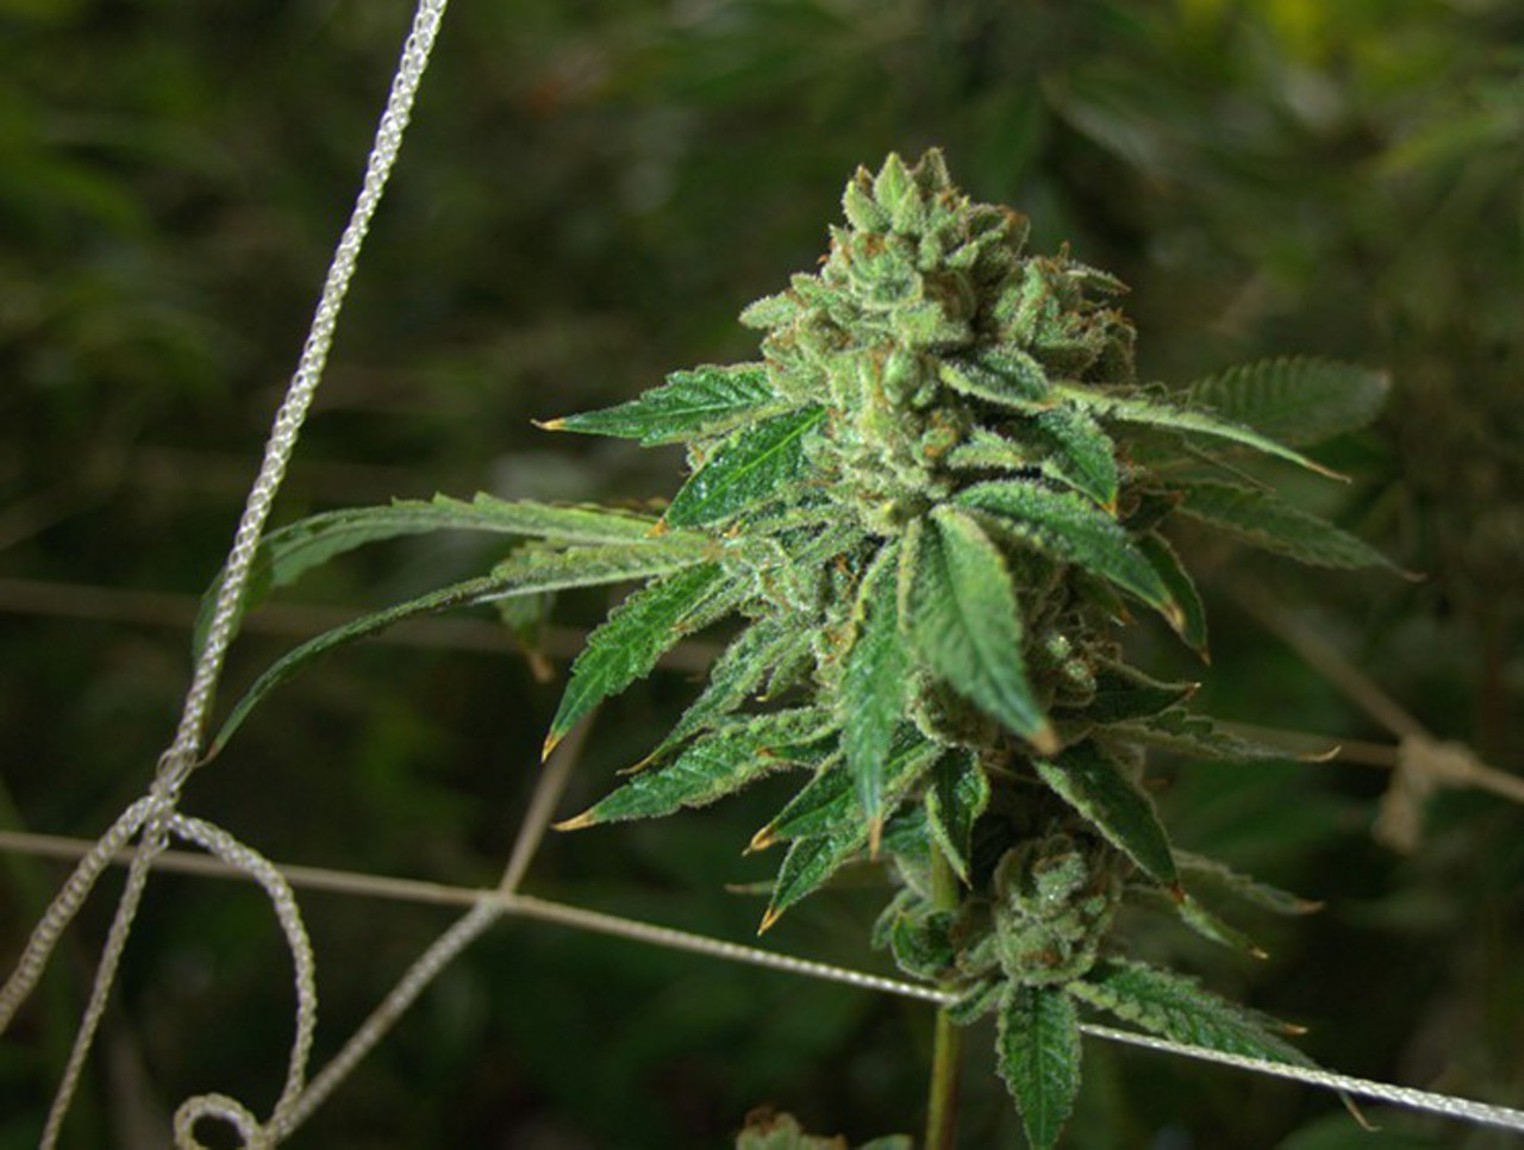 Marijuana To Be Rescheduled in U.S. What Does That Mean for Texas?